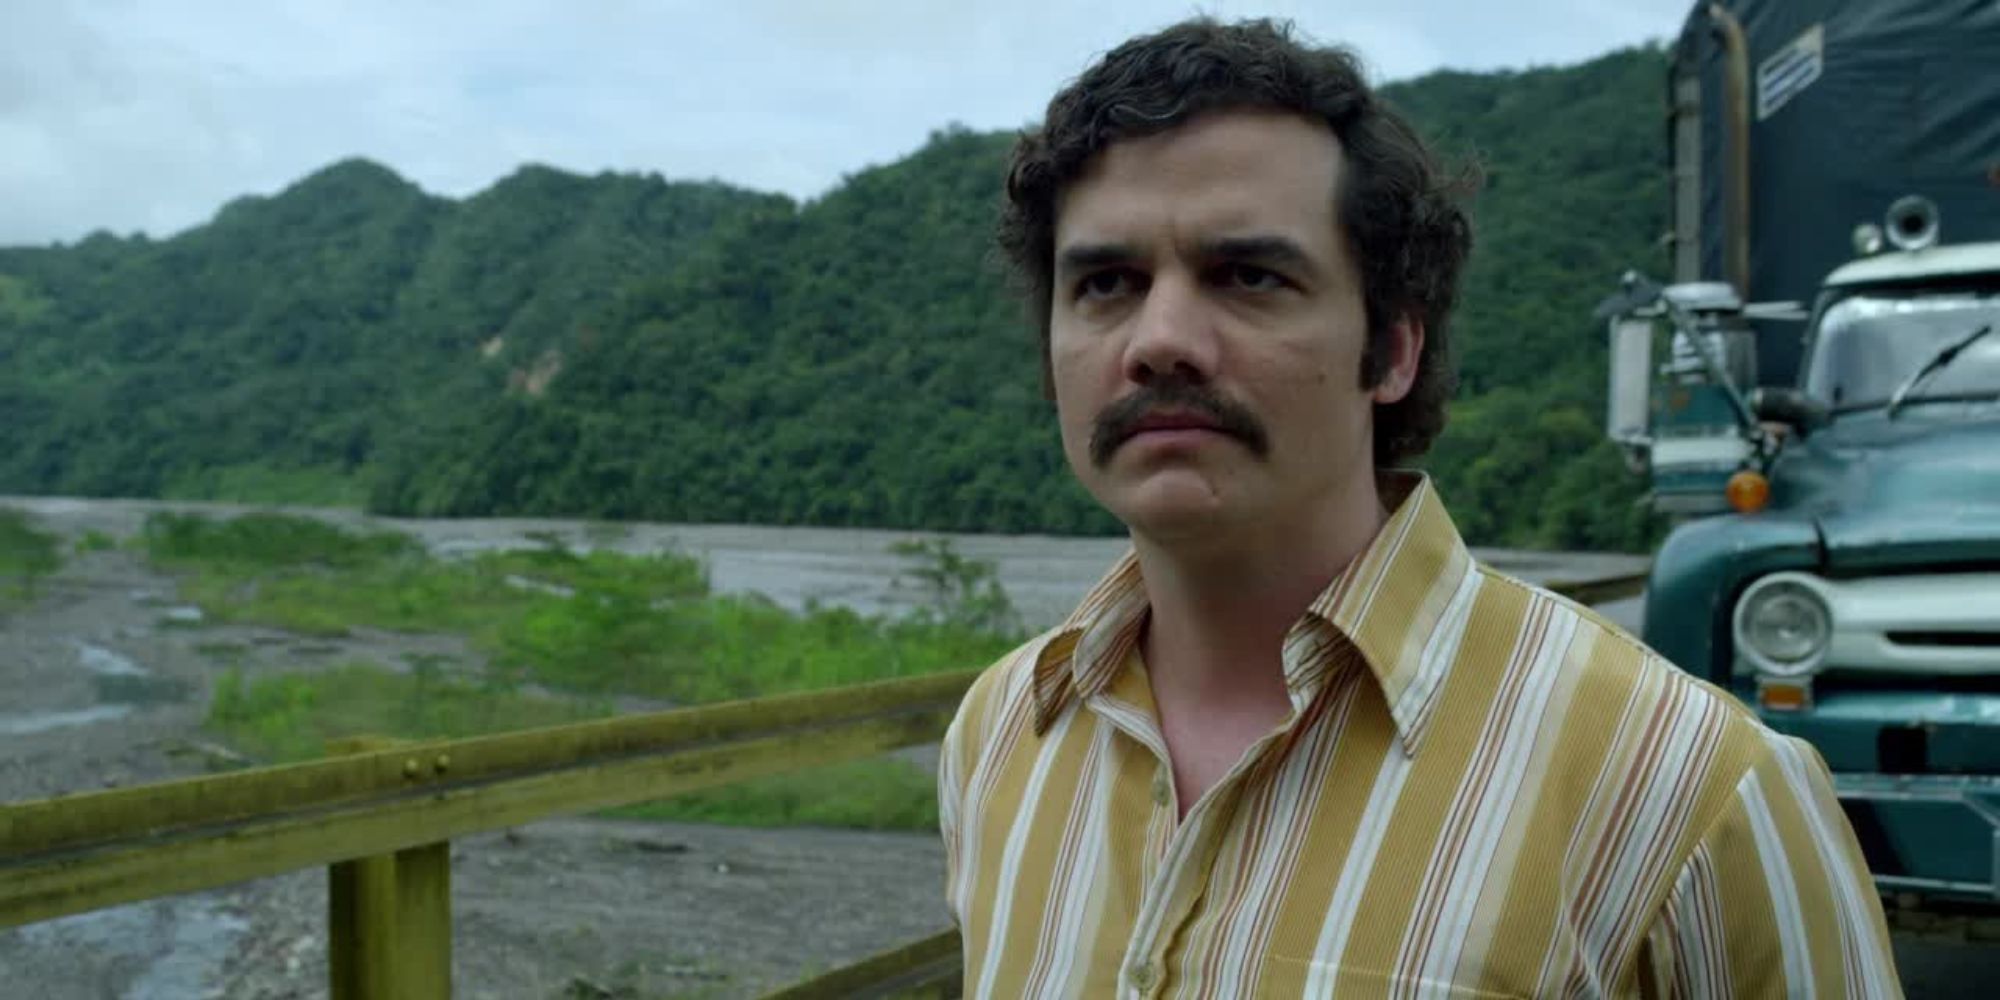 The lead character of Narcos in front of a truck